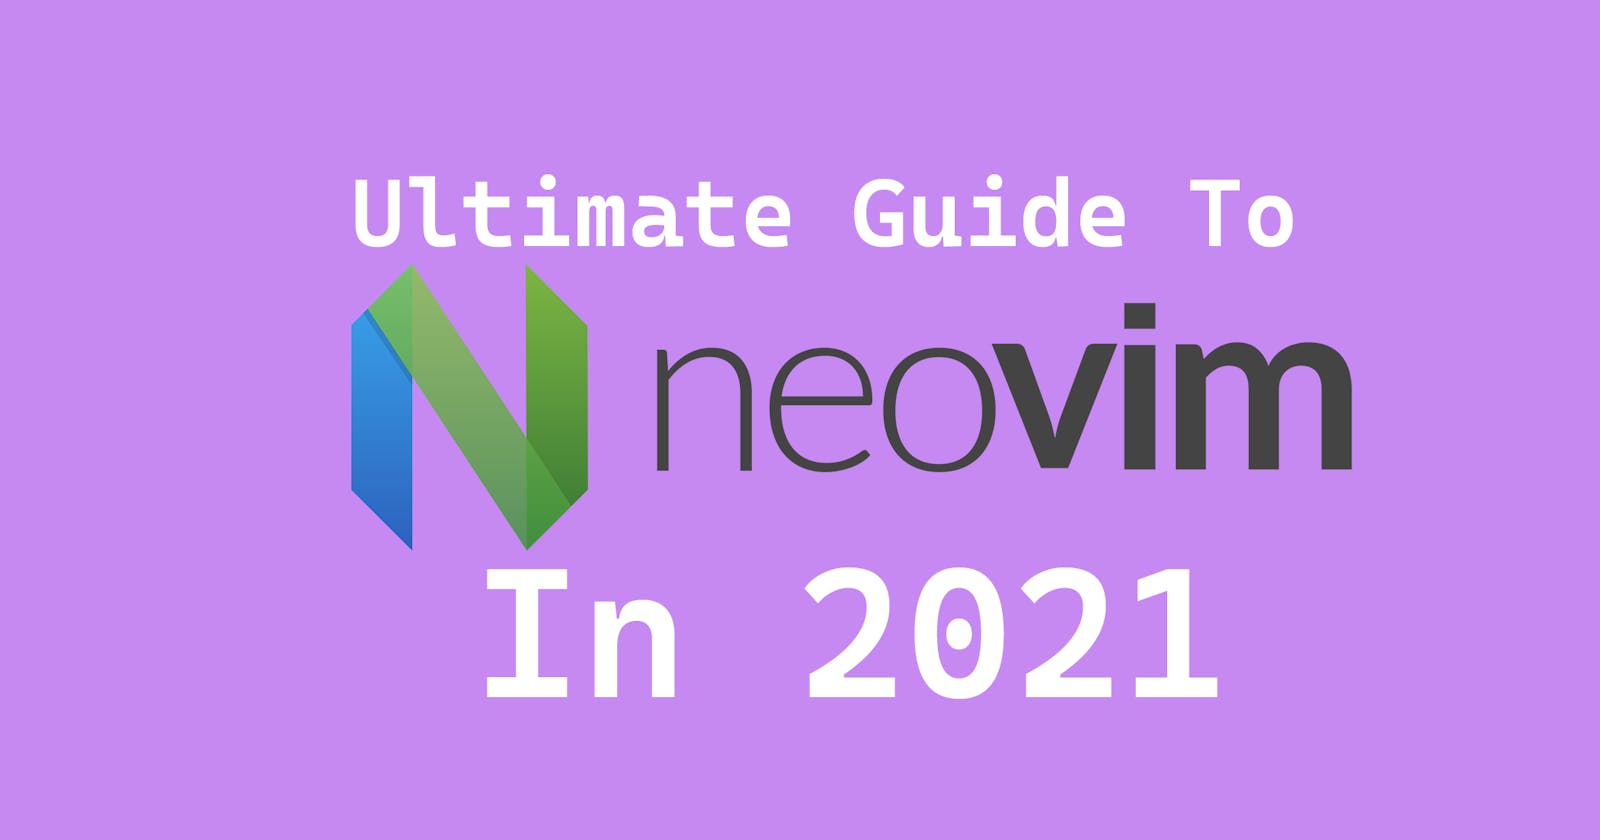 The Ultimate Neovim Guide For 2021 and Beyond